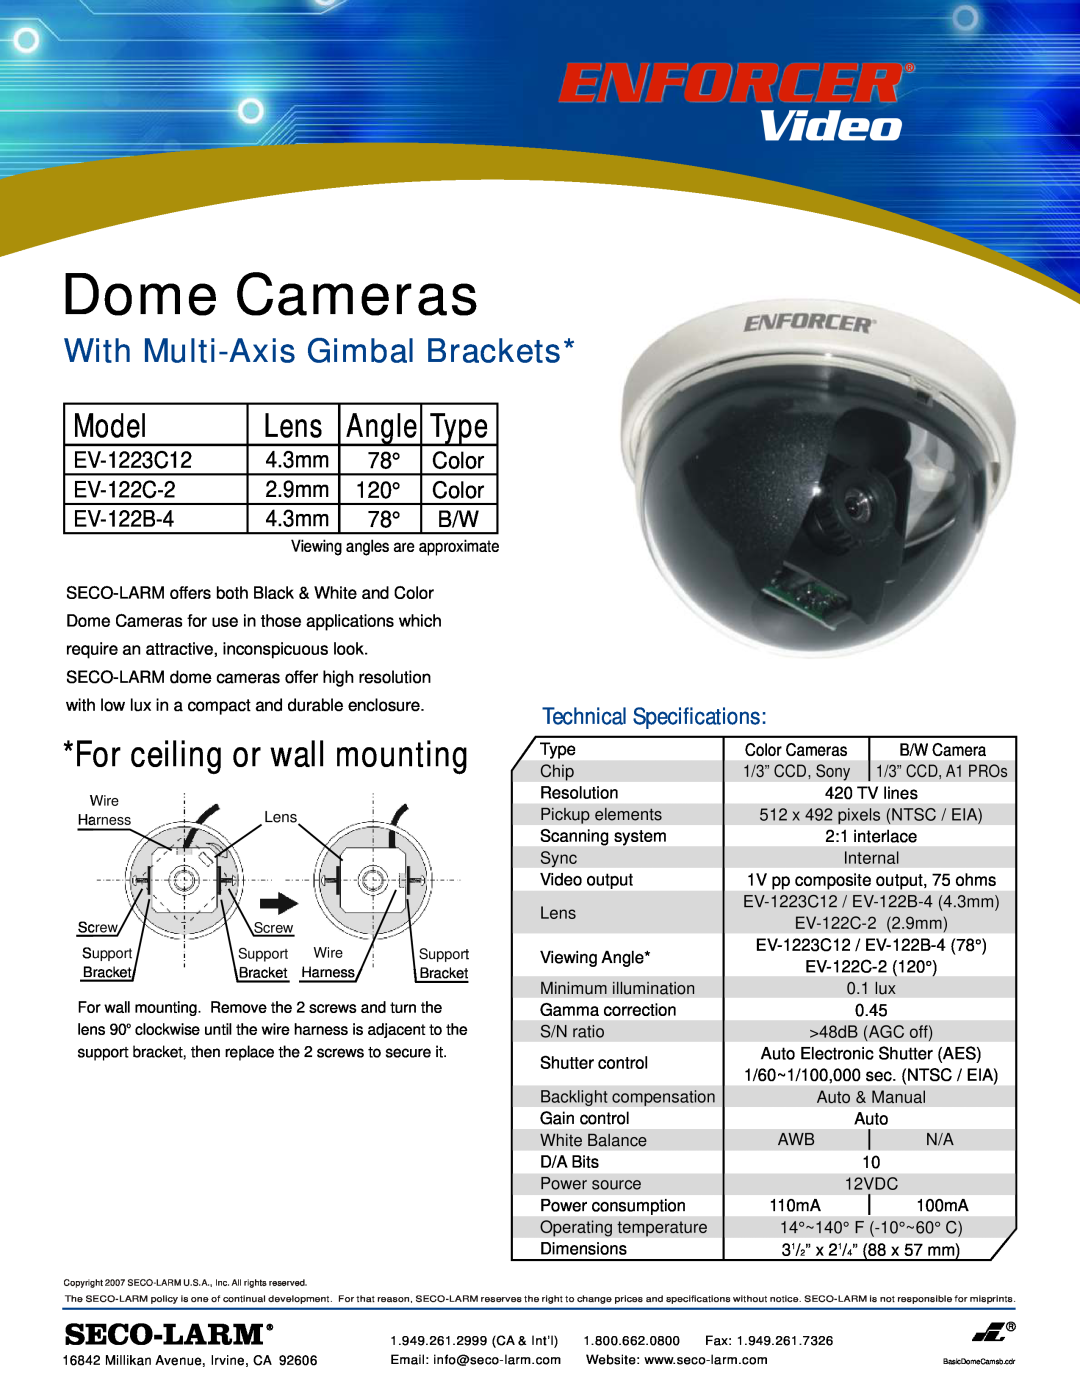 SECO-LARM USA EV-122B-4 technical specifications Dome Cameras, For ceiling or wall mounting, Model, Lens, Type, Angle 